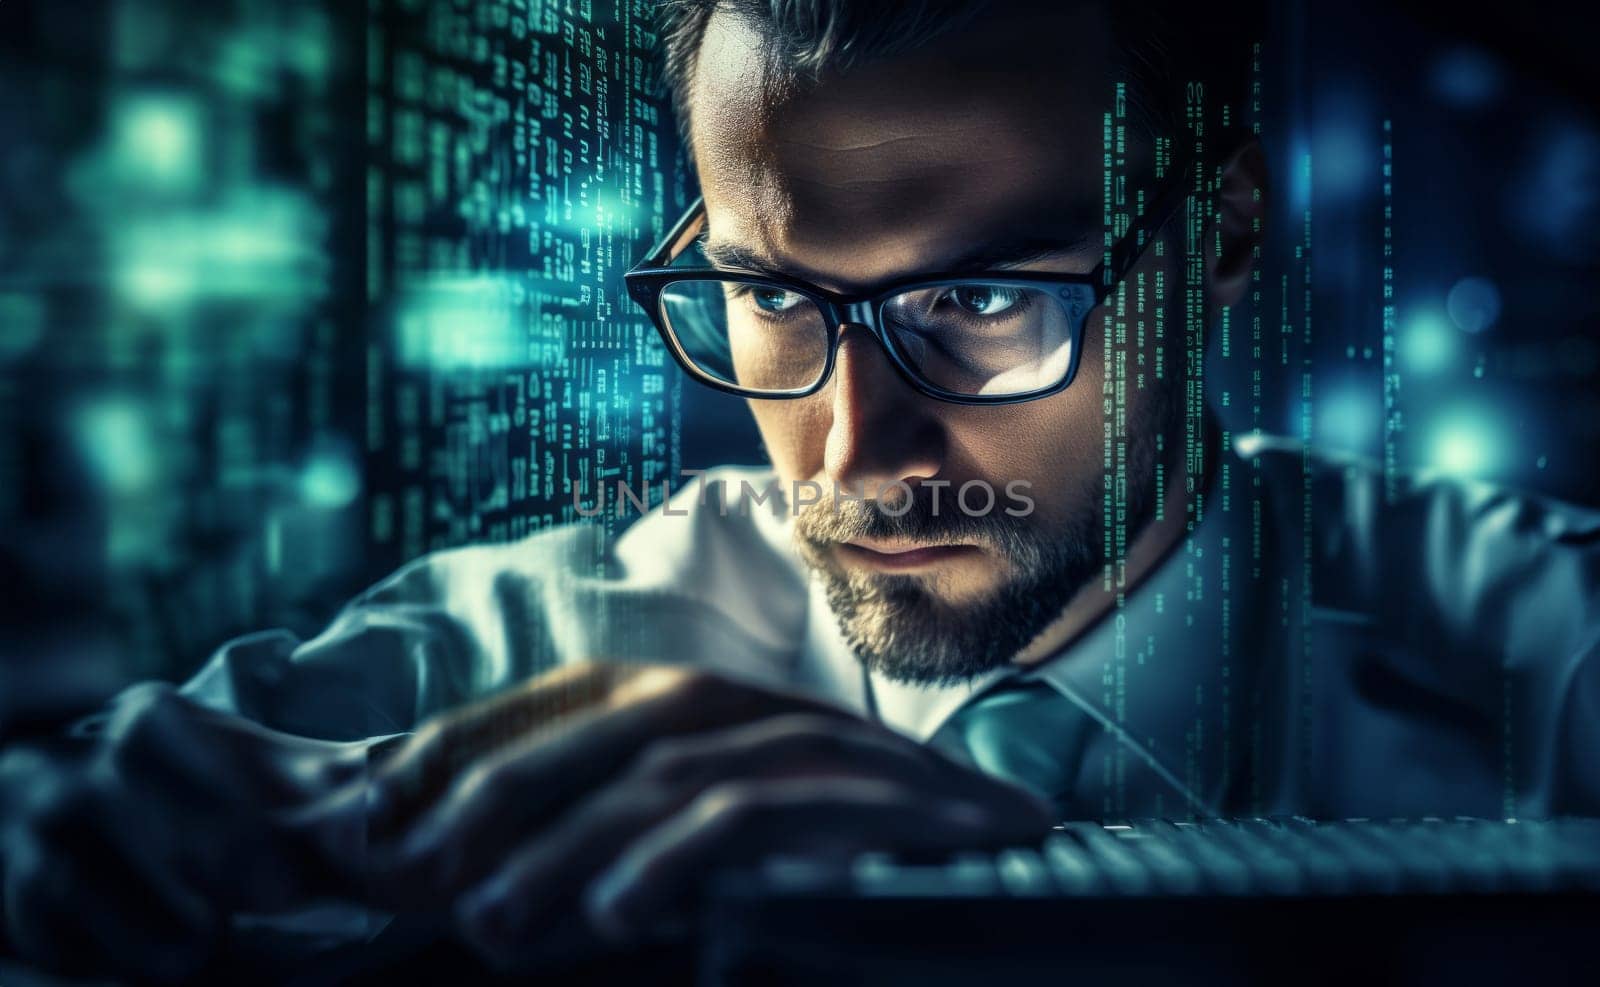 A hacker, surrounded by technological holograms, intensely focuses on coding in a close-up shot, portraying a futuristic cyber atmosphere.Generated image by dotshock